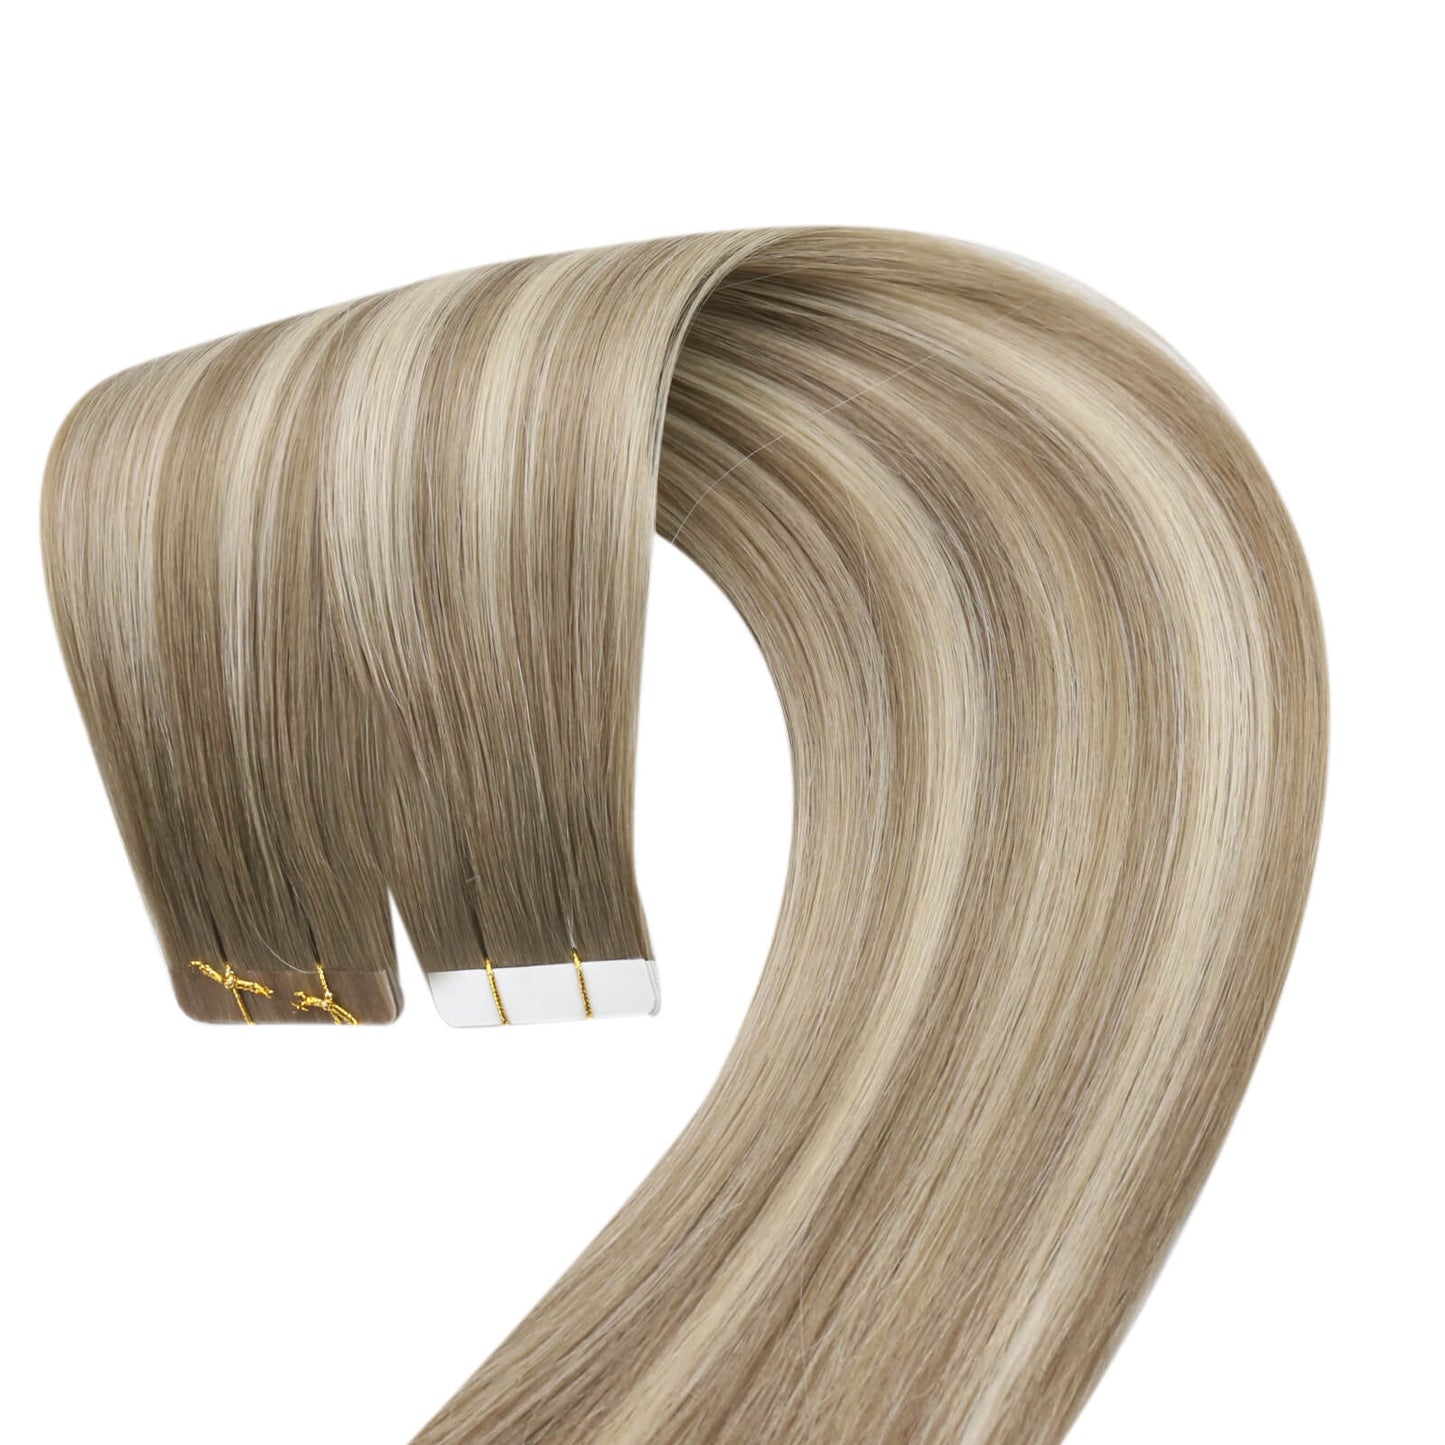 virgin human hair extensions skin weft professional tape hair extensions